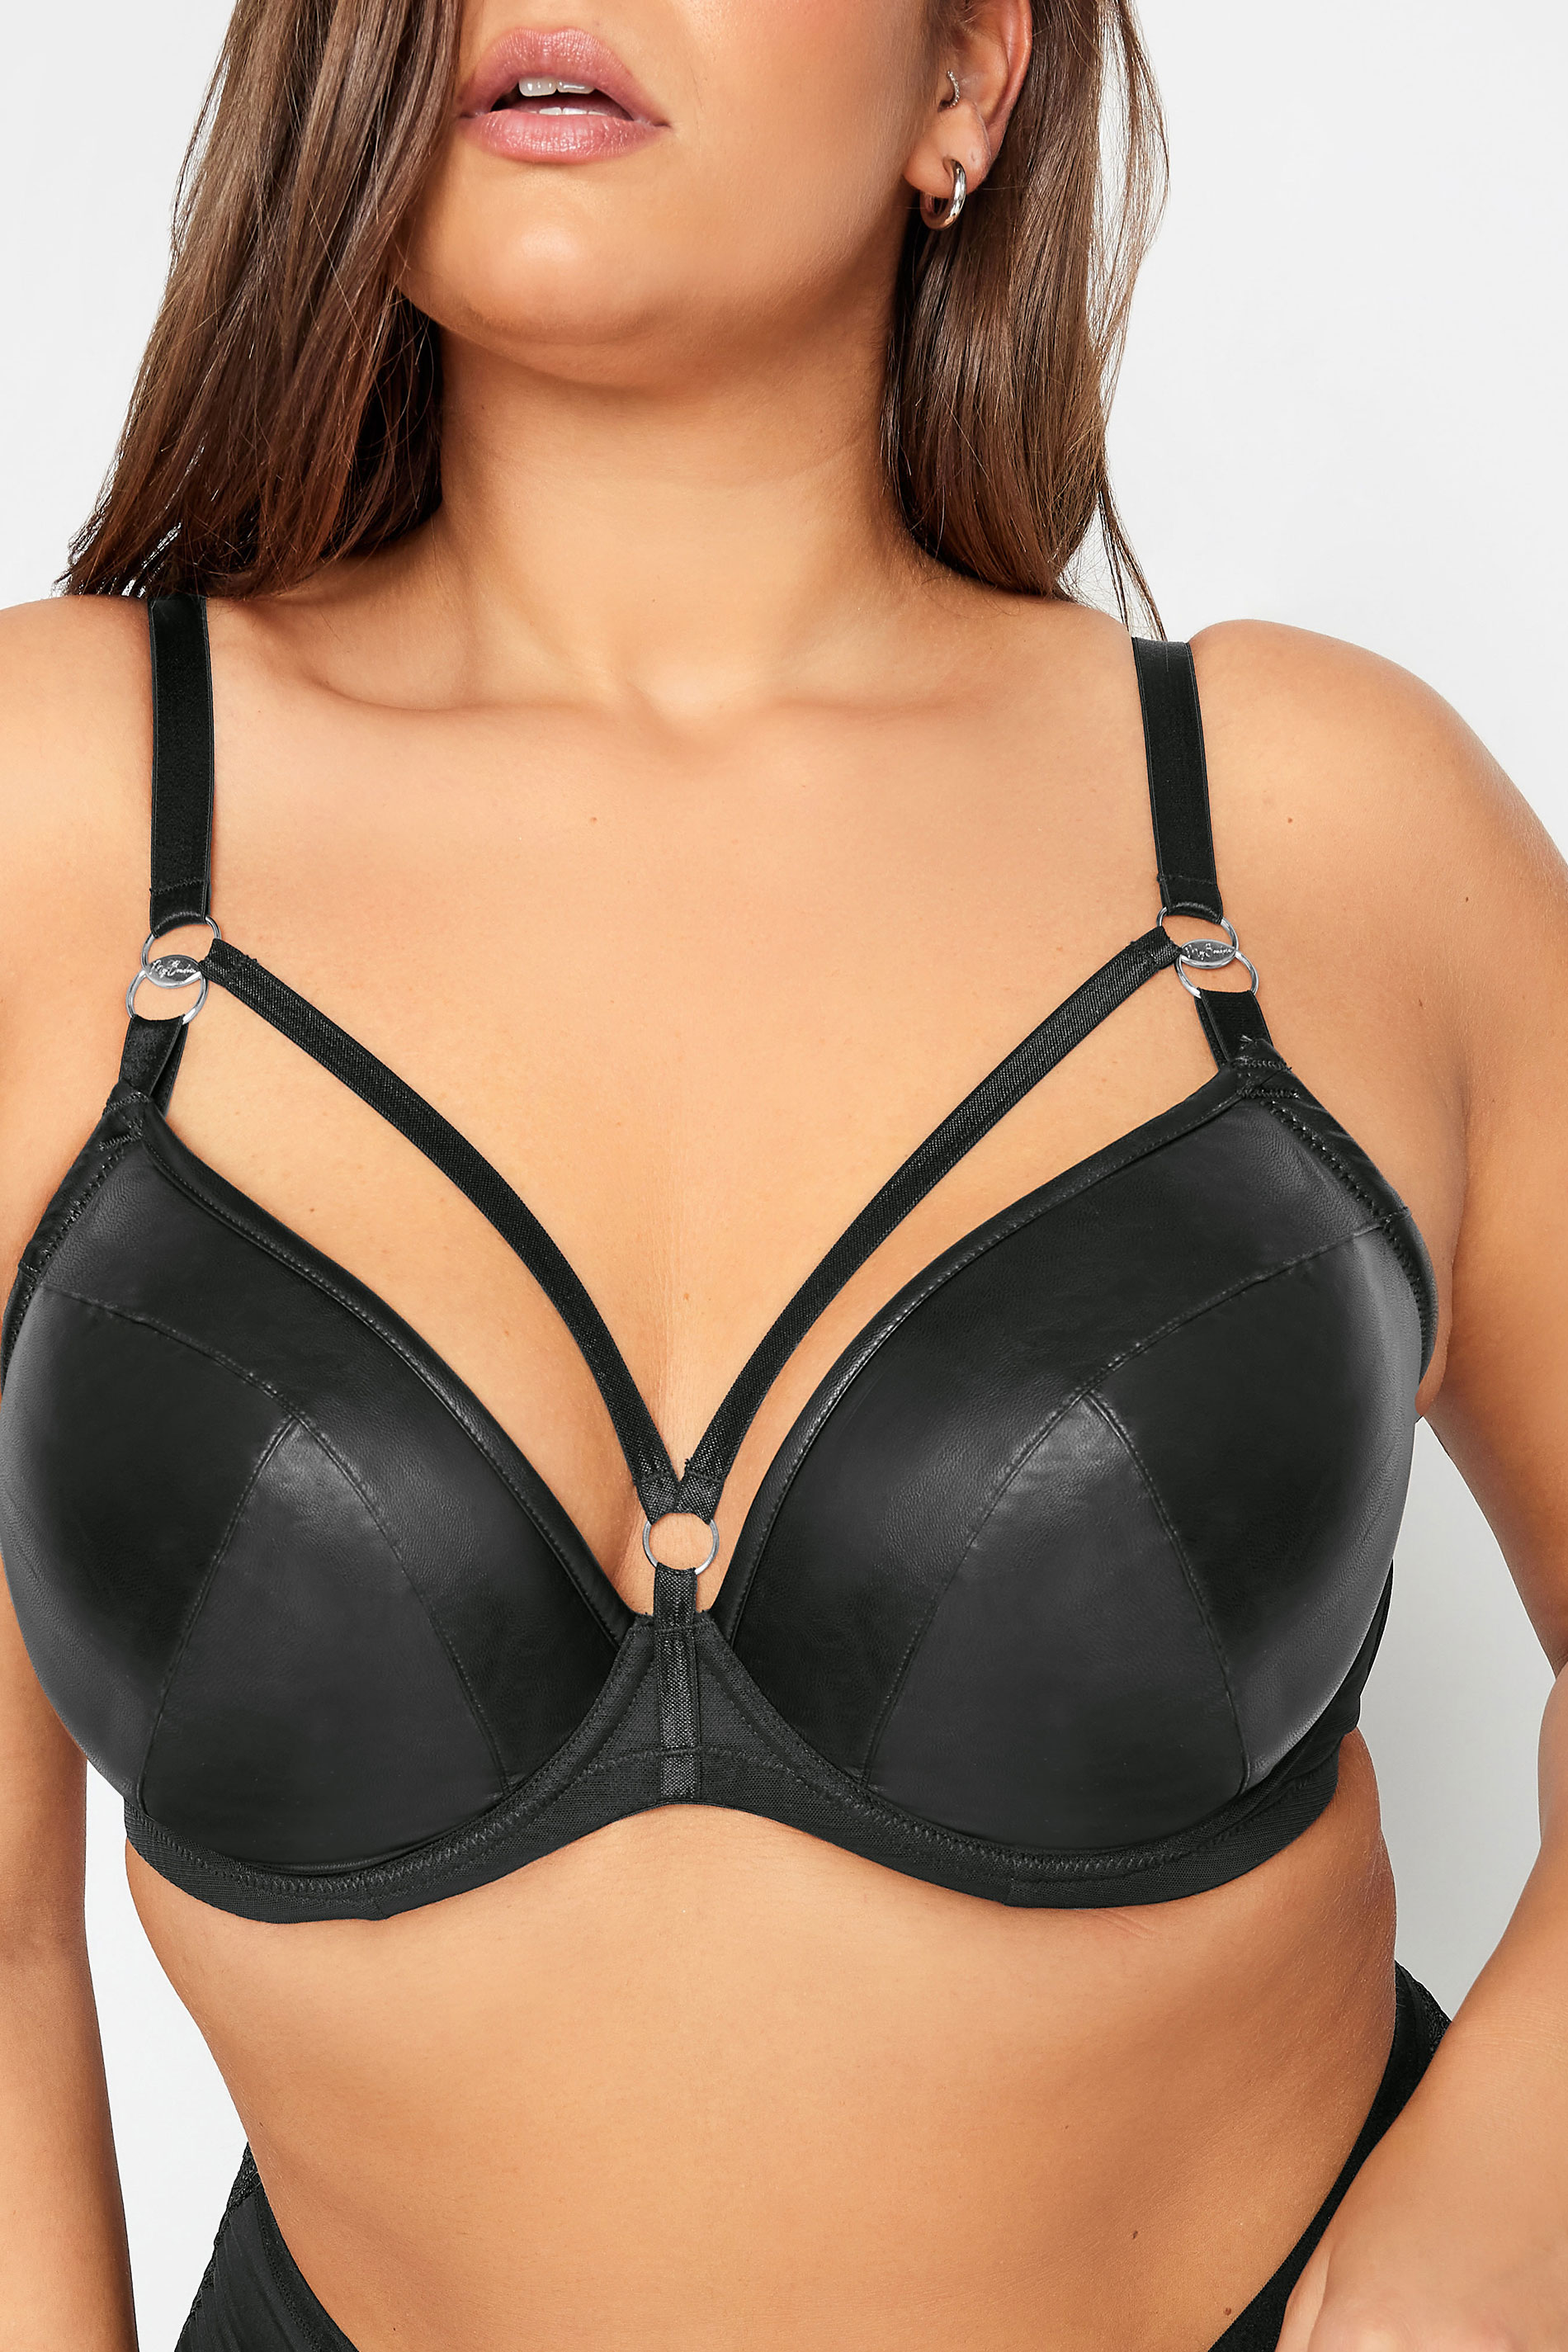 Black PU Leather Bras for Women Sexy Push Up Bra Plus Size Gothic Lingerie  Underwear Sports Bra with Non